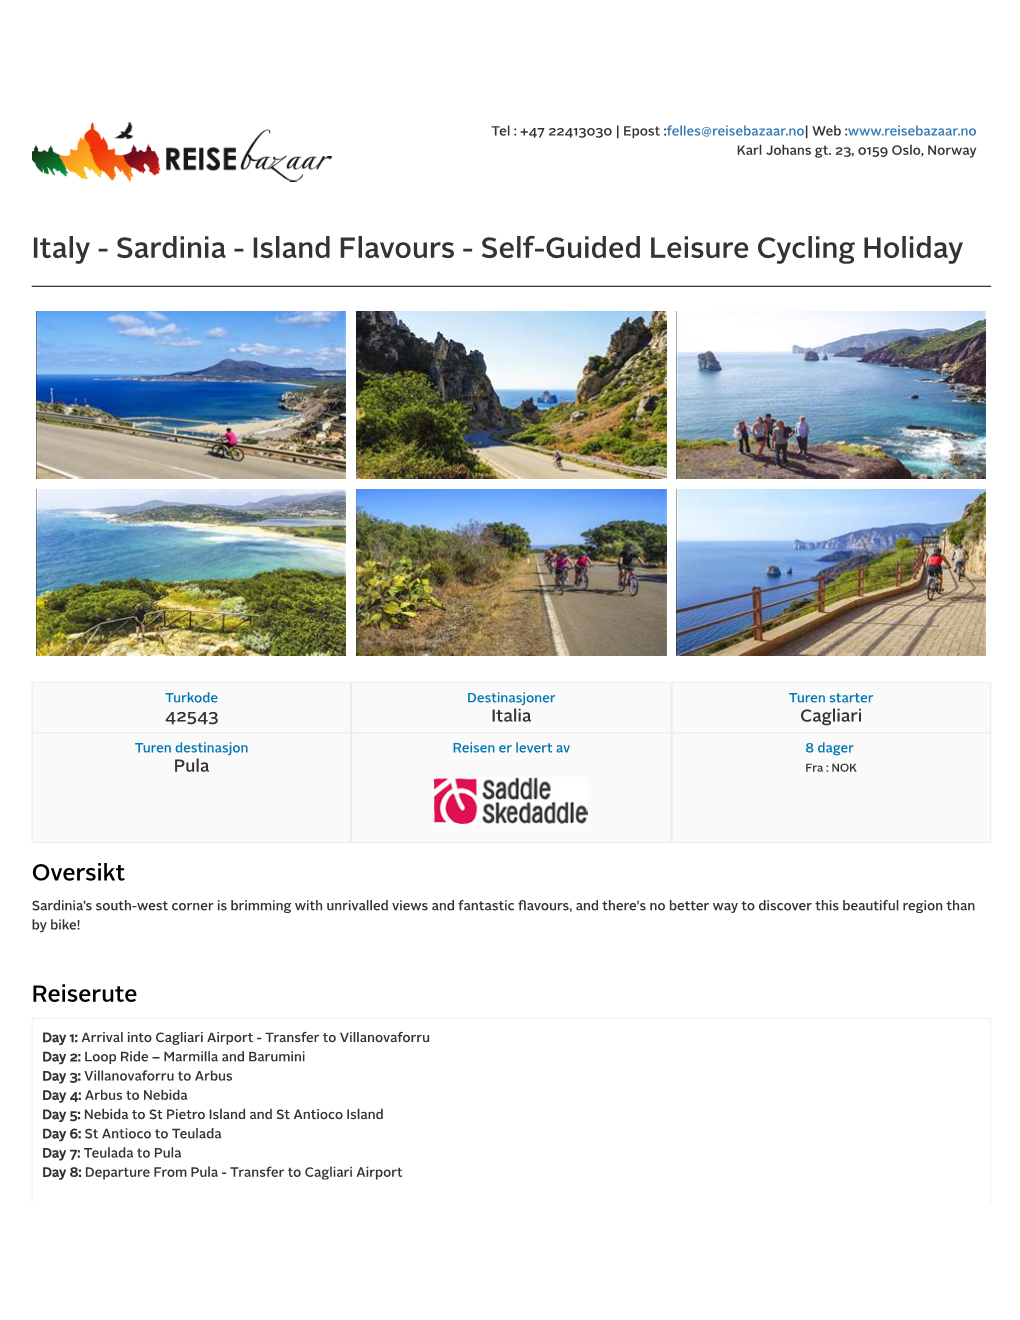 Sardinia - Island Flavours - Self-Guided Leisure Cycling Holiday